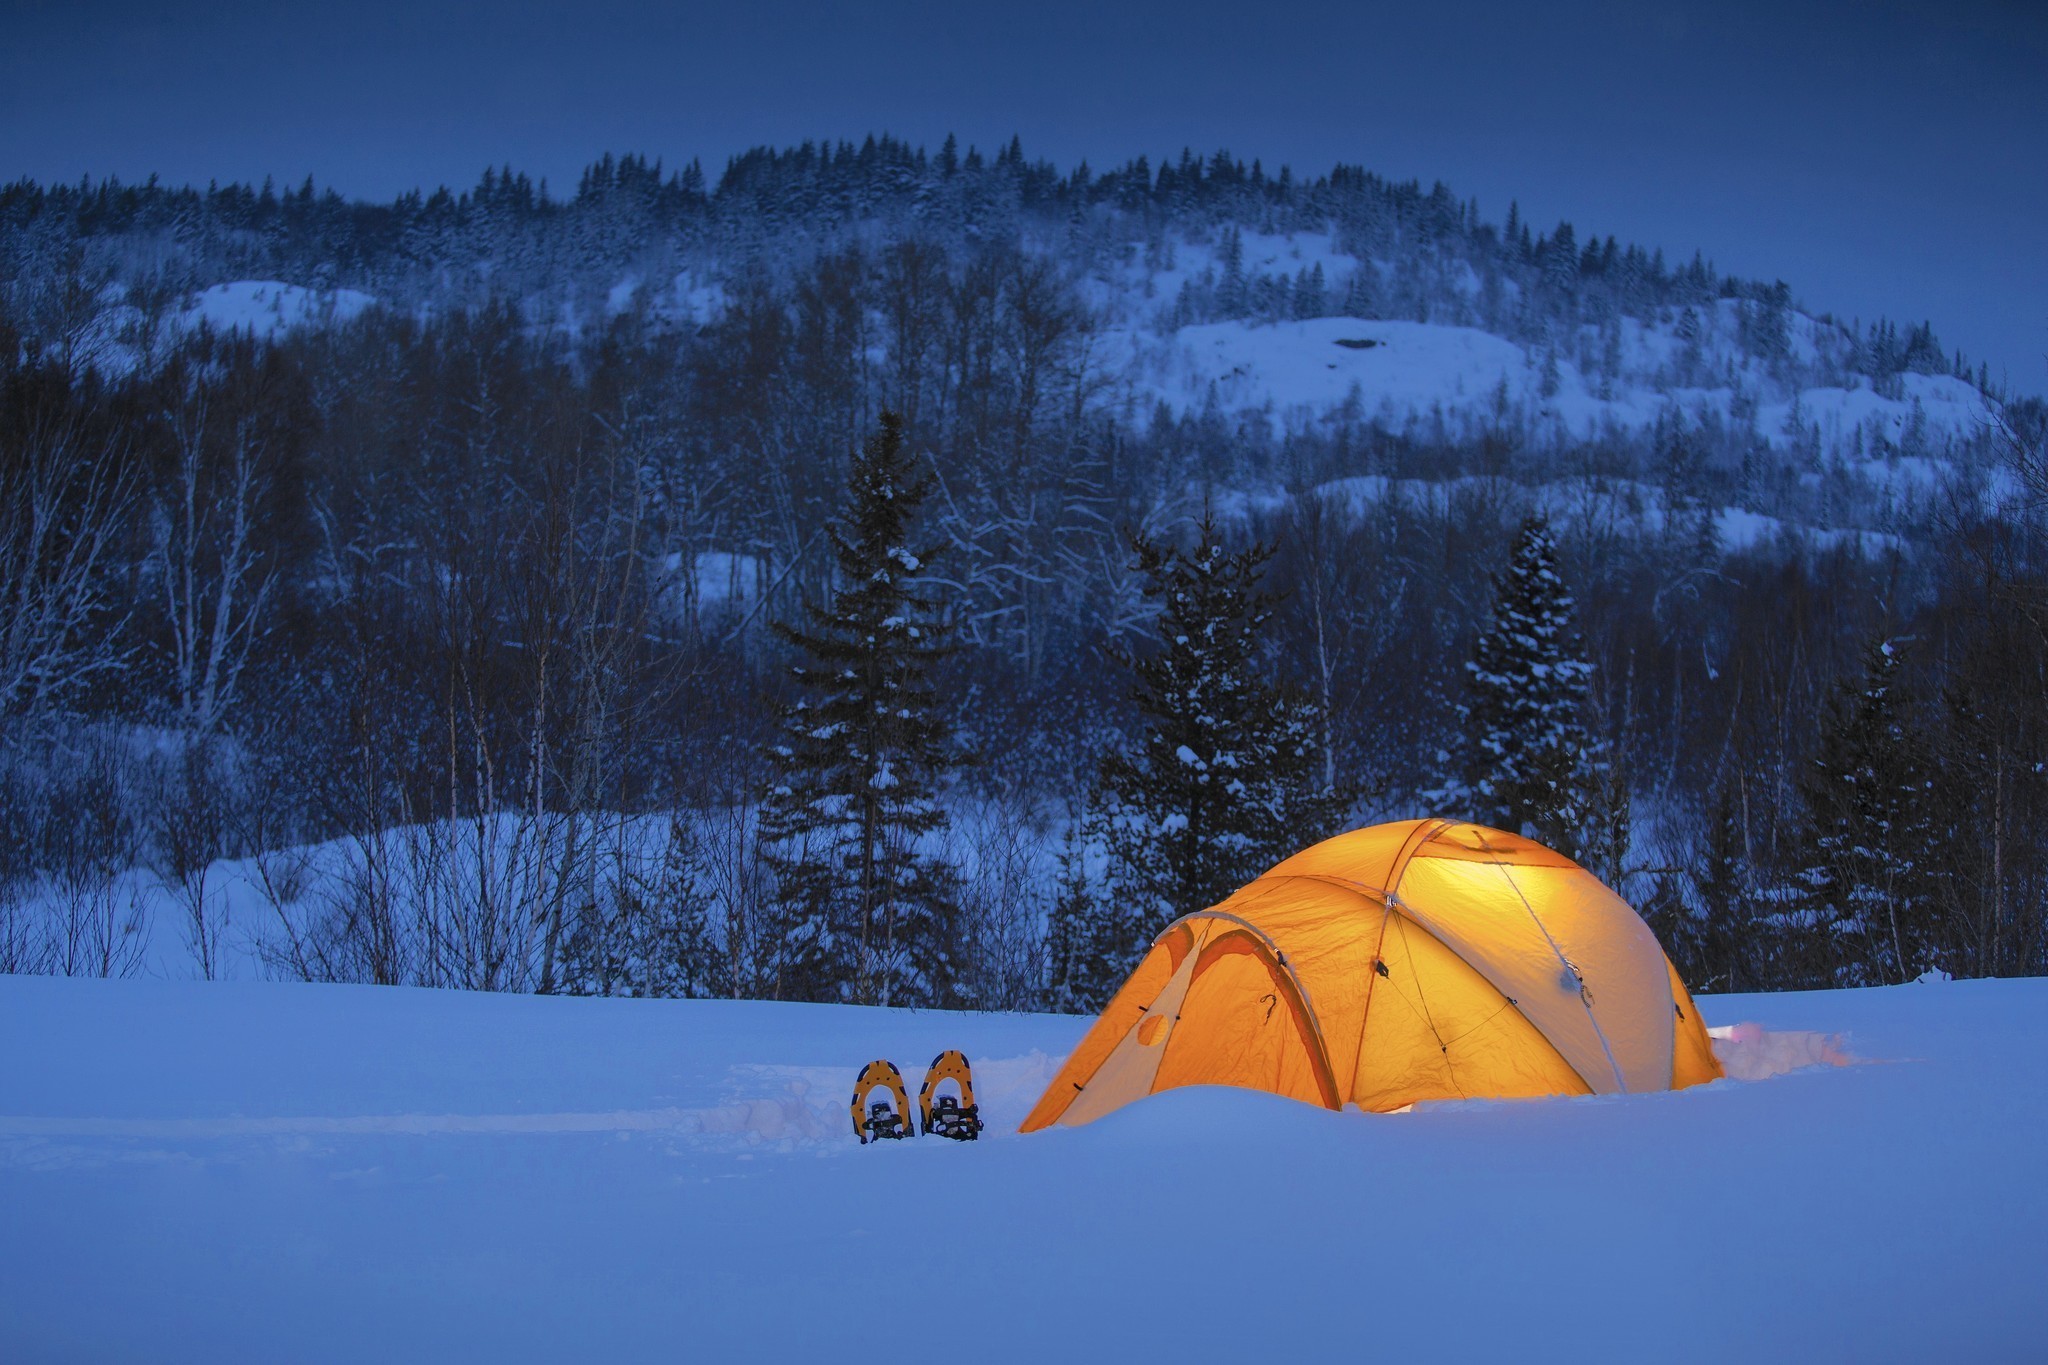 camping, photography, mountain, tent, winter